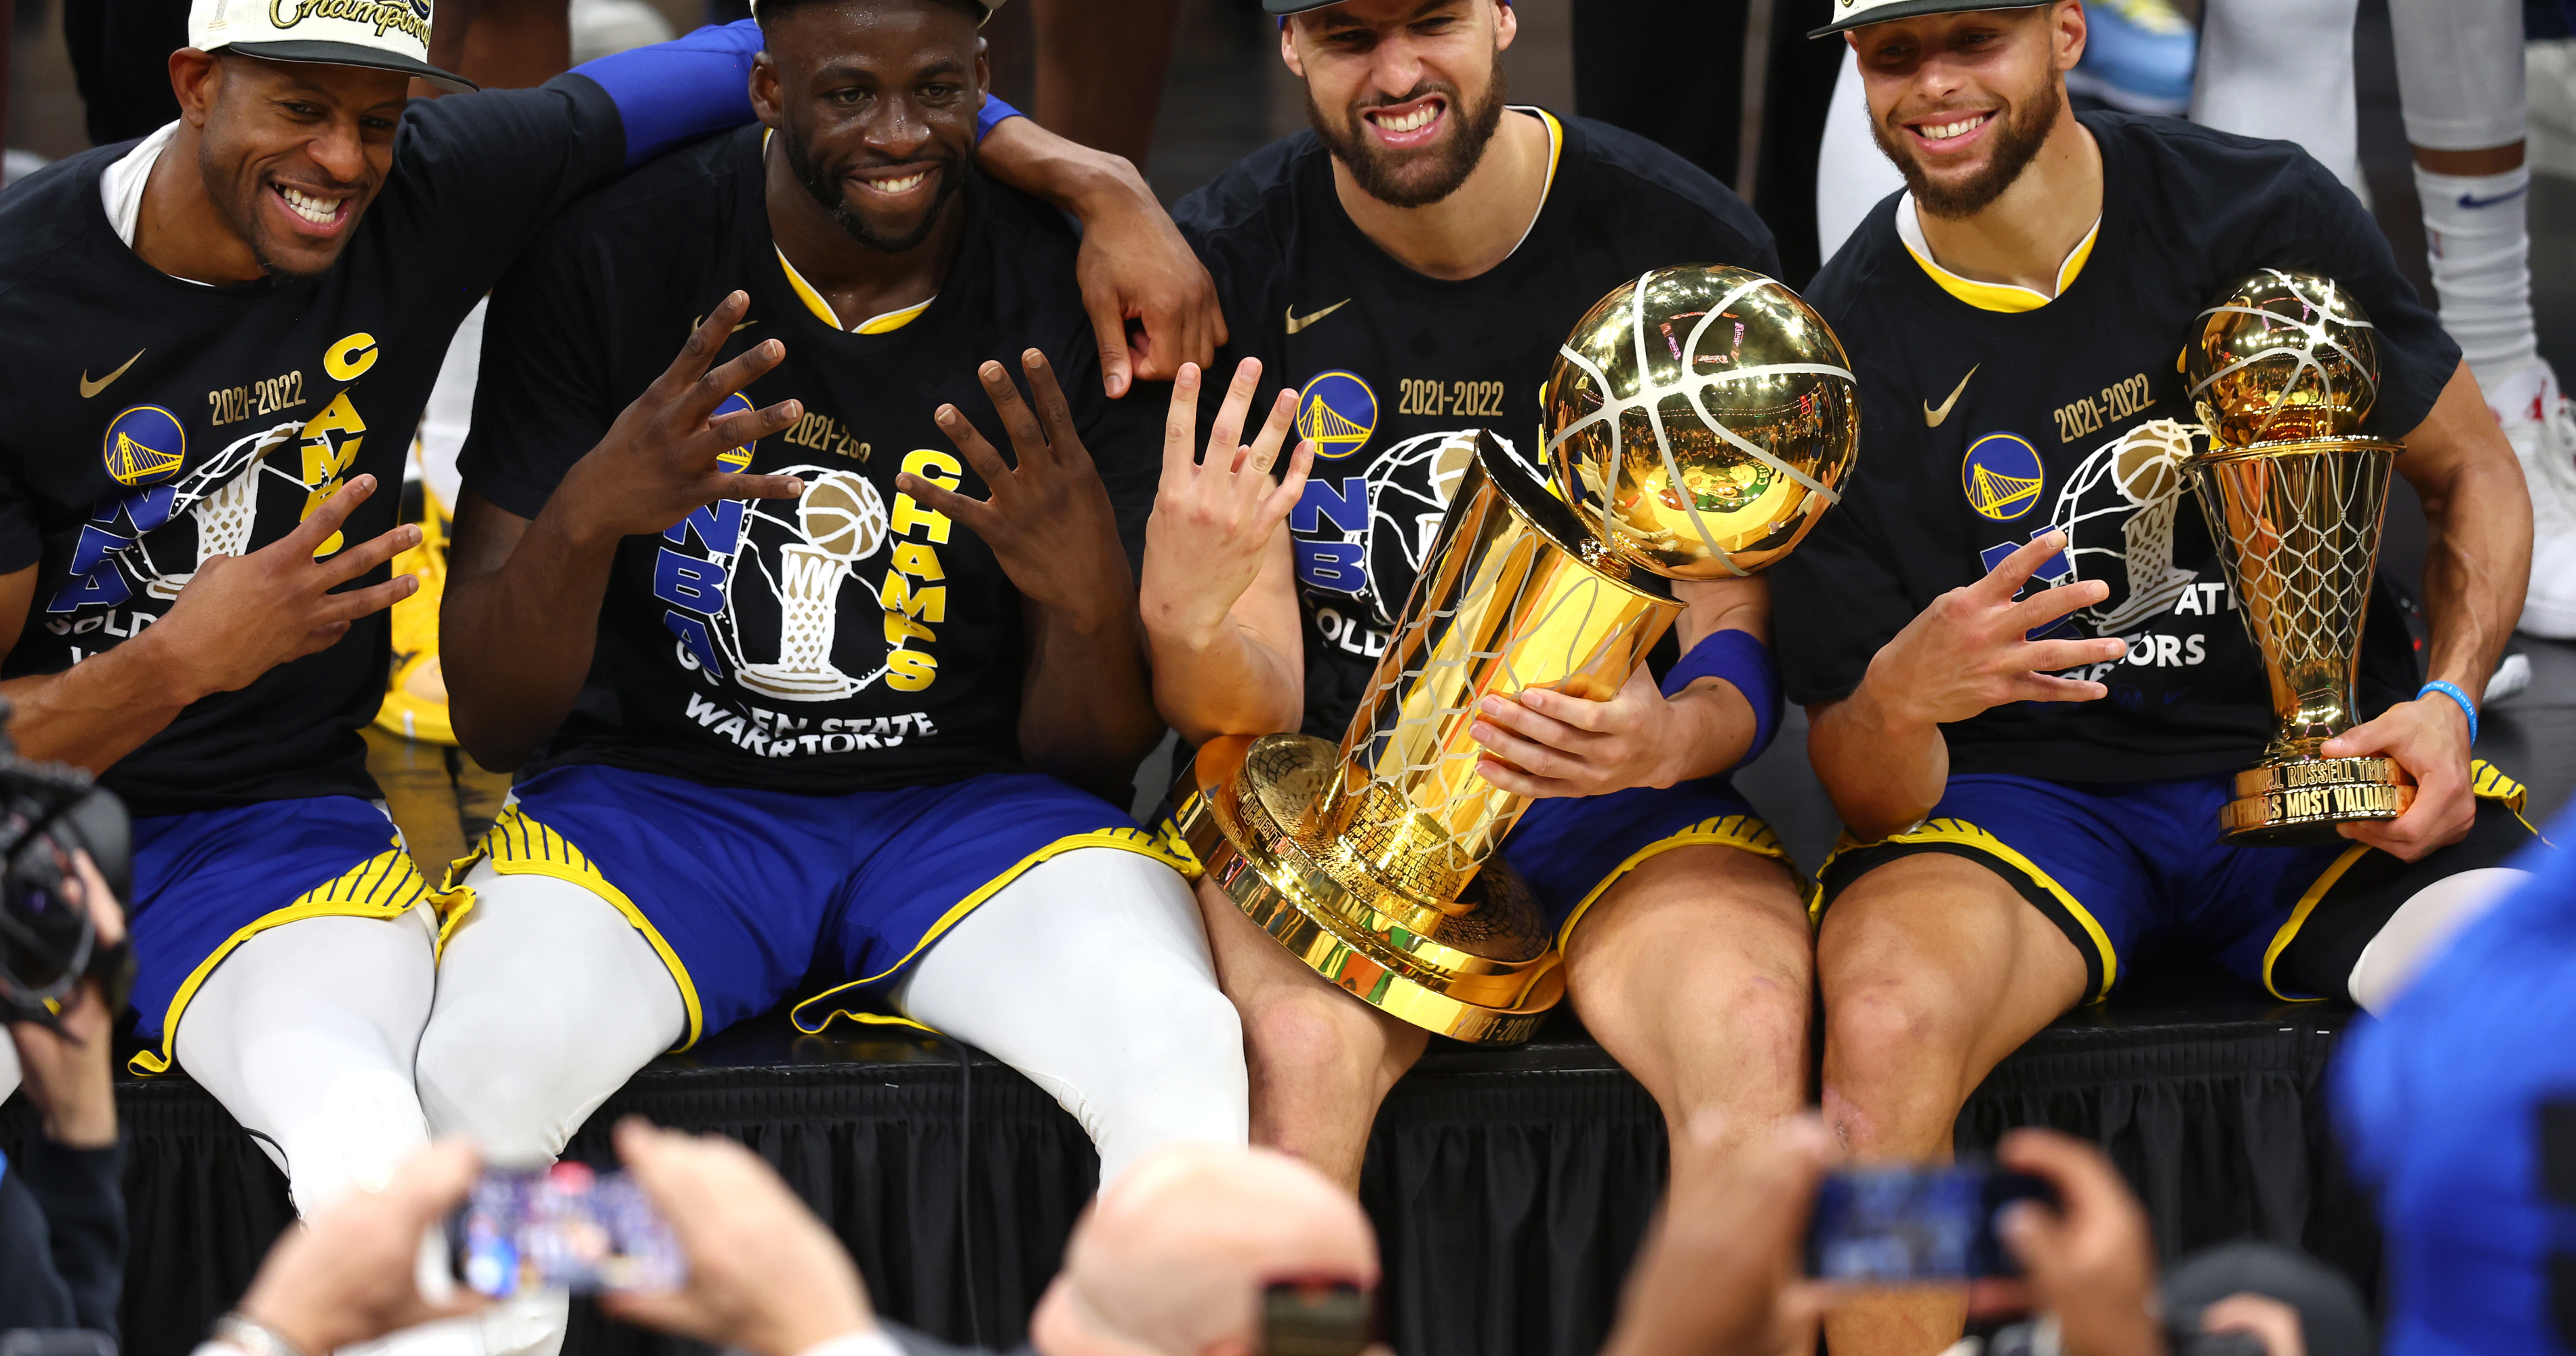 Warriors Parade 2022: Route, Date, Schedule, TV Info and More